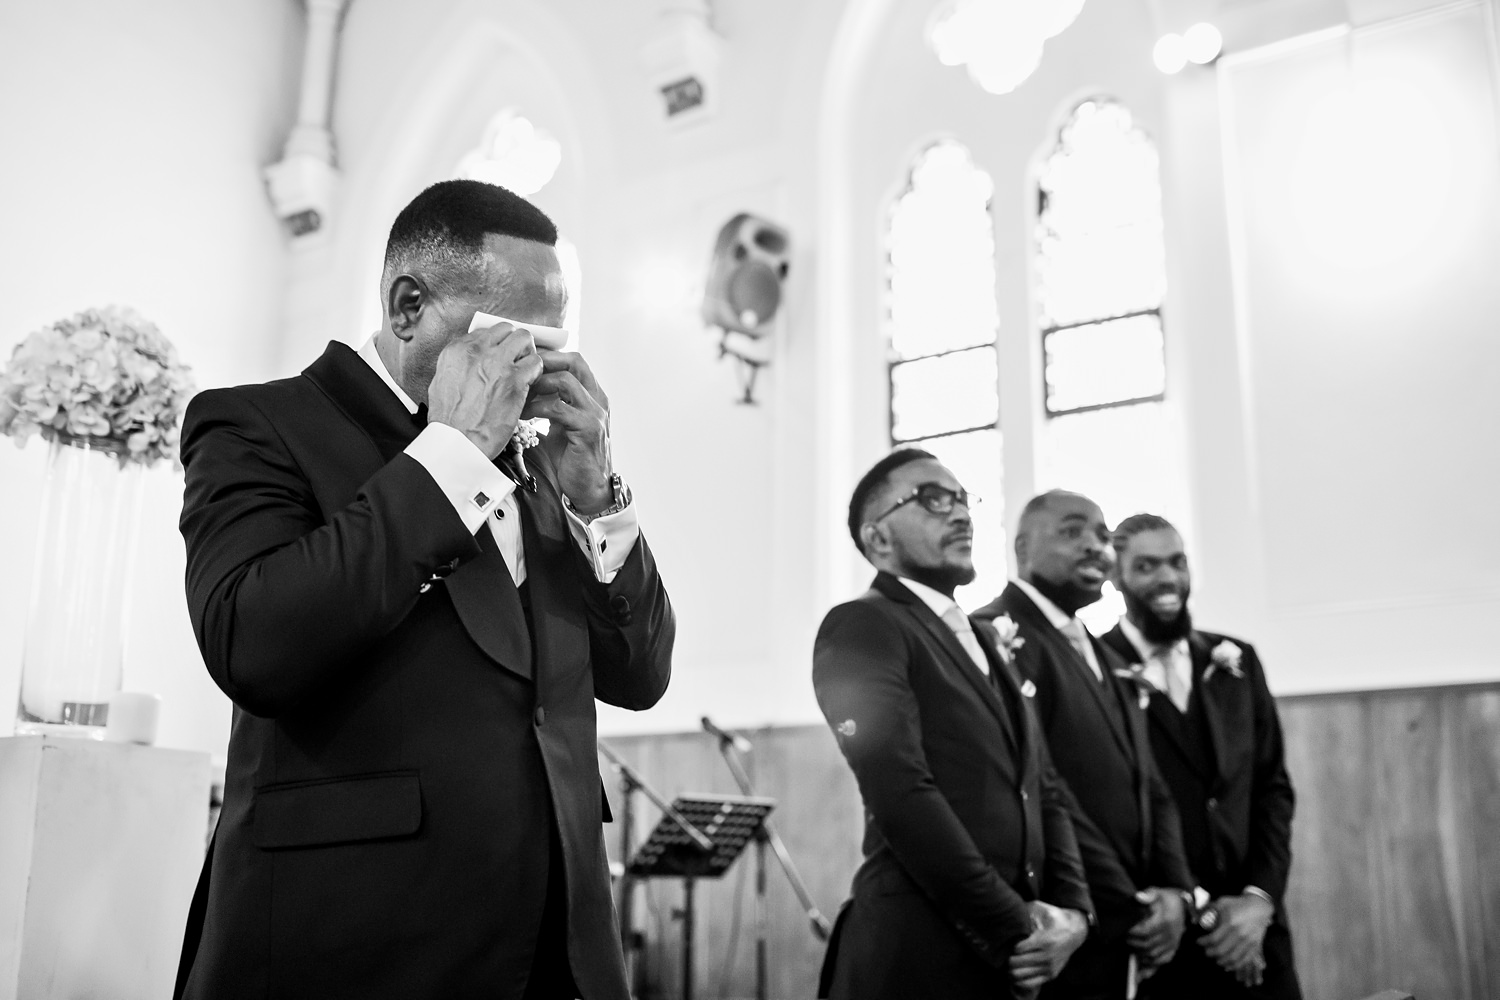 The groom wipes away his tears and gromsmen look on with smiles as the bride makes her way down the church aisle